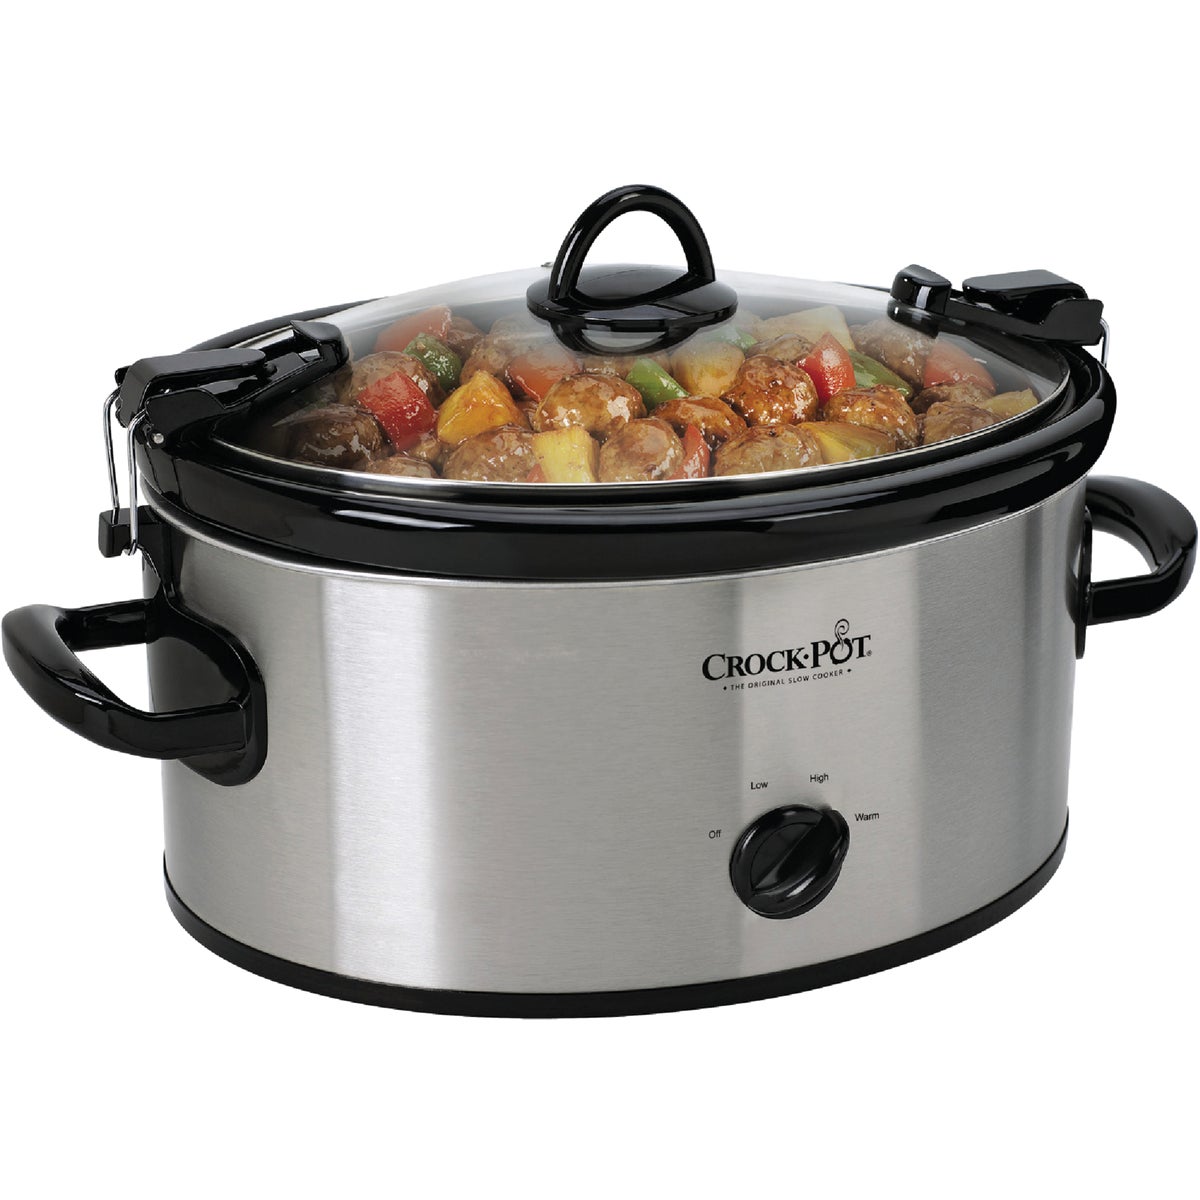 Crock-Pot 6 Qt. Stainless Steel Oval Slow Cooker